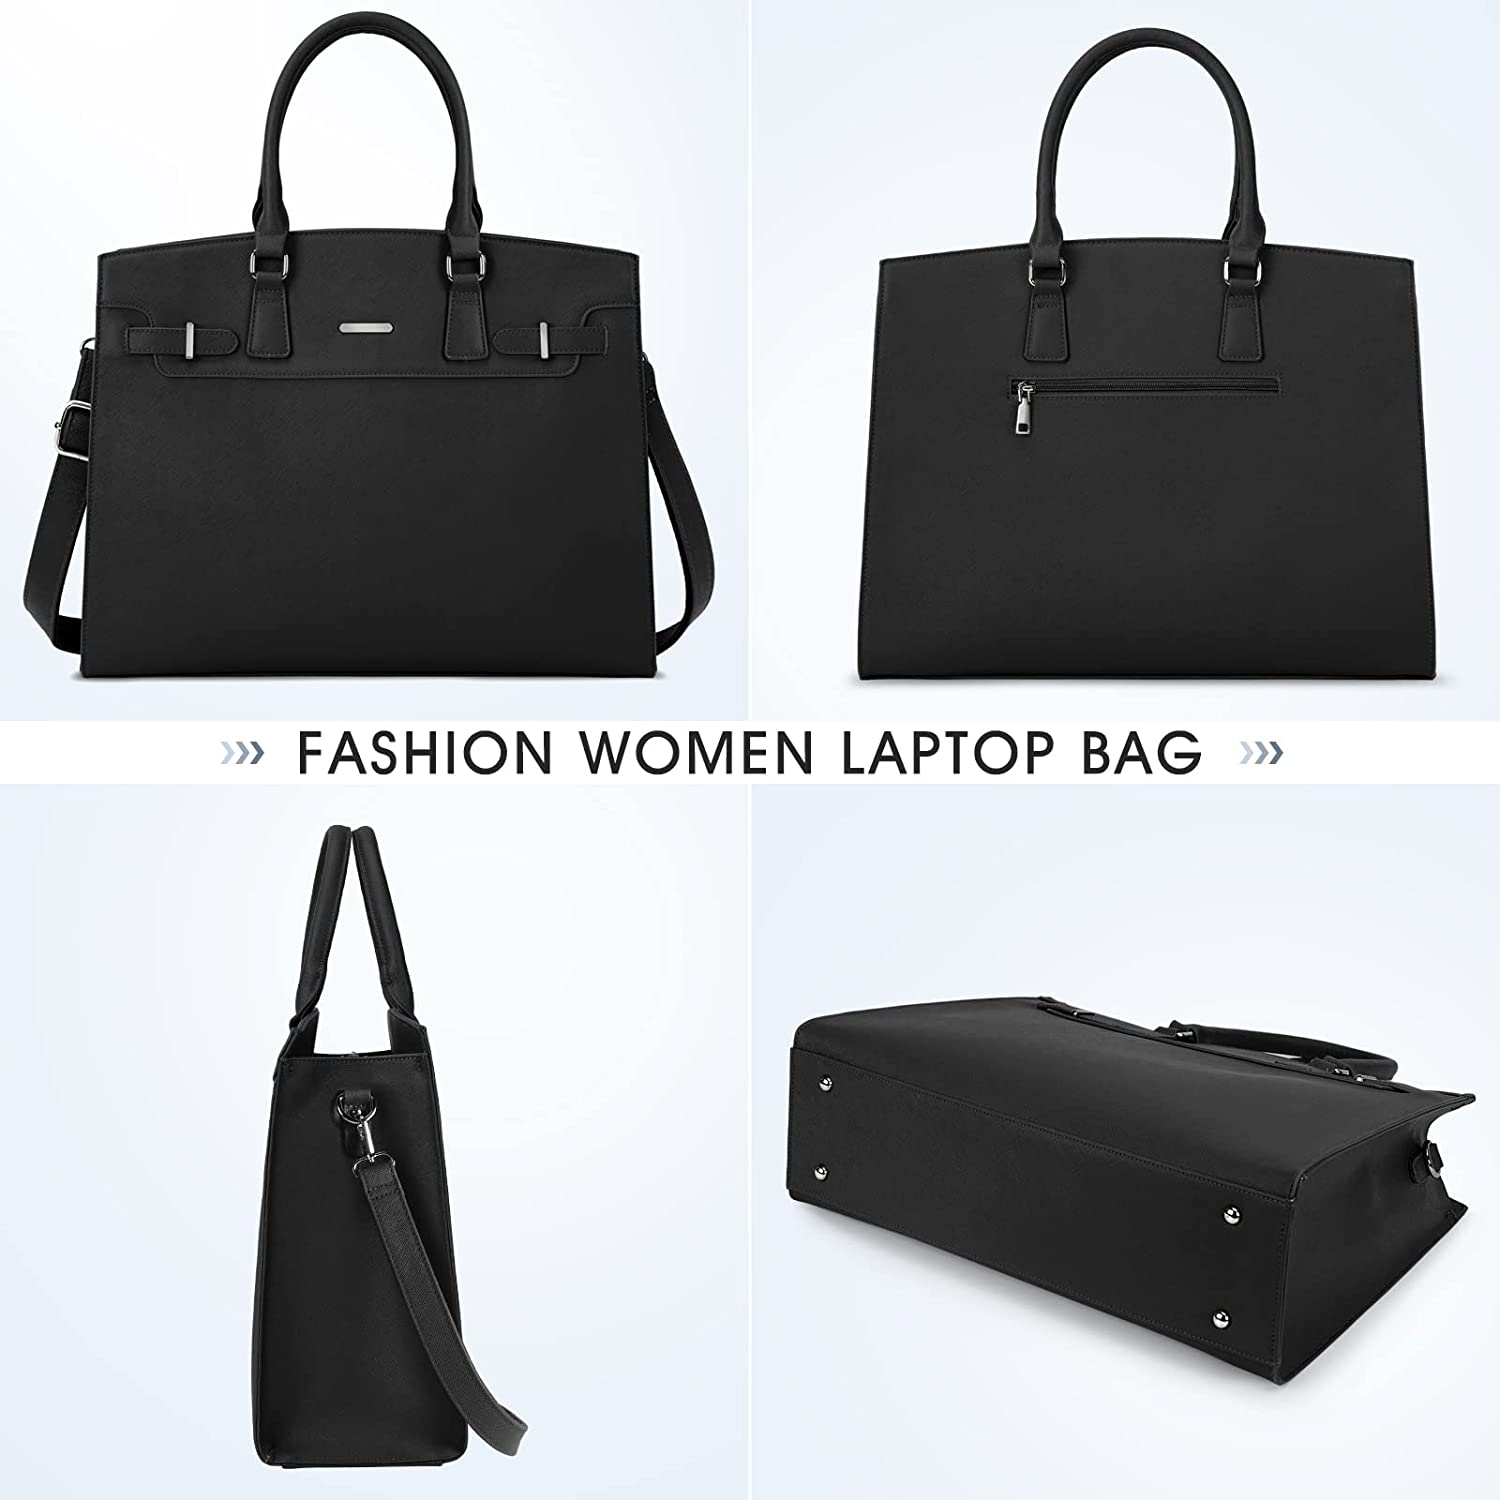 Laptop Bags for Women 15.6 inch Laptop Tote Bag PU Leather Large